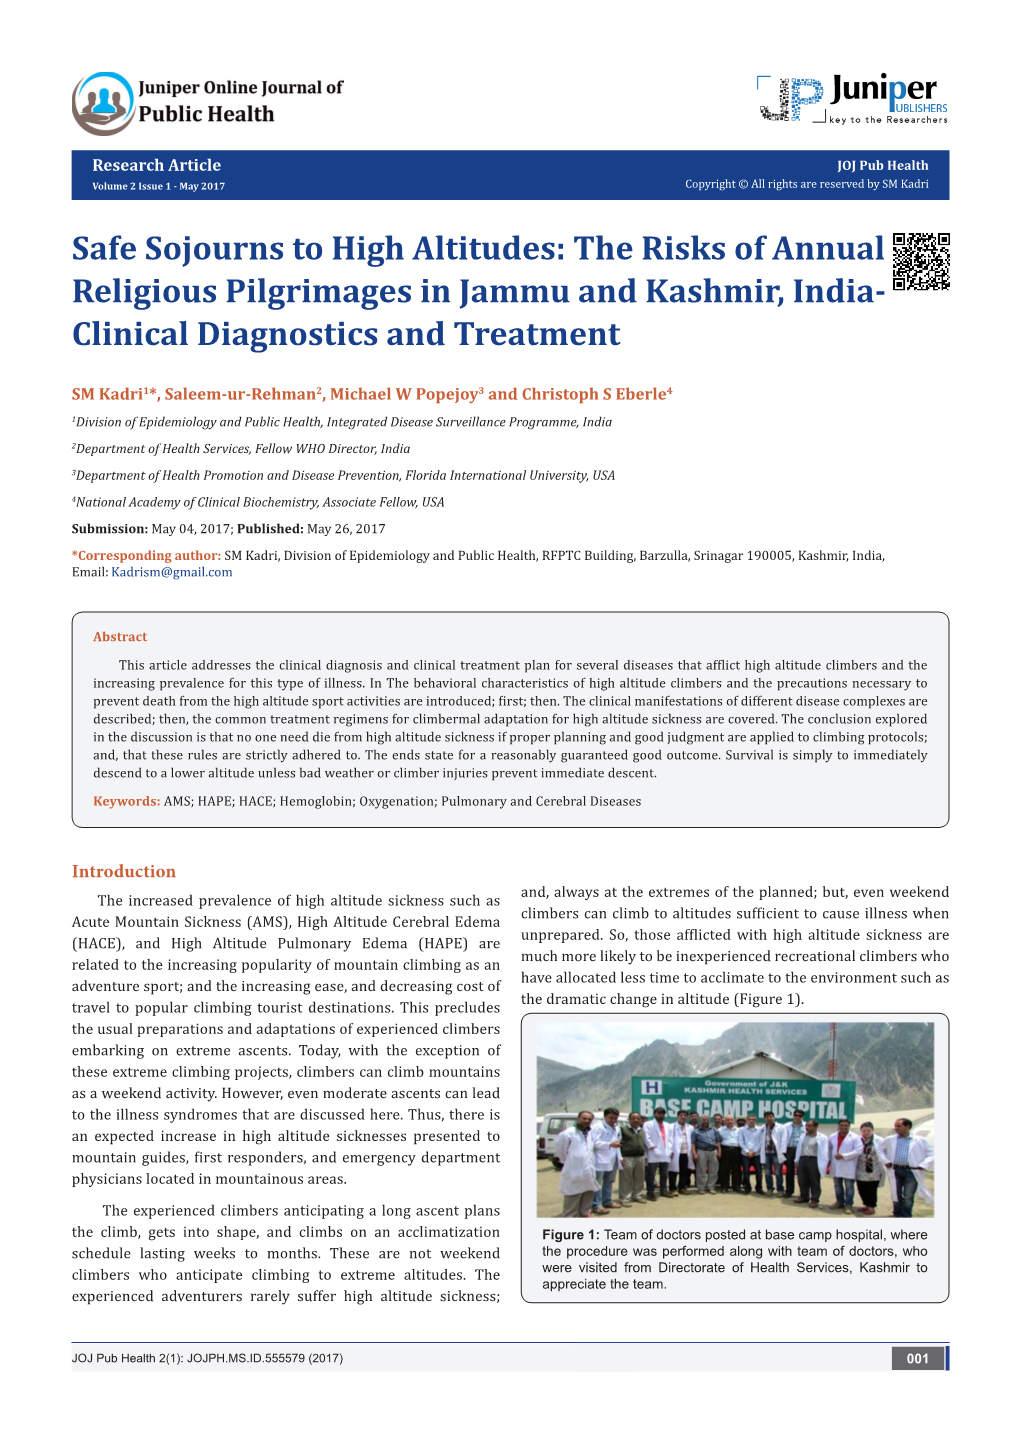 Safe Sojourns to High Altitudes: the Risks of Annual Religious Pilgrimages in Jammu and Kashmir, India- Clinical Diagnostics and Treatment